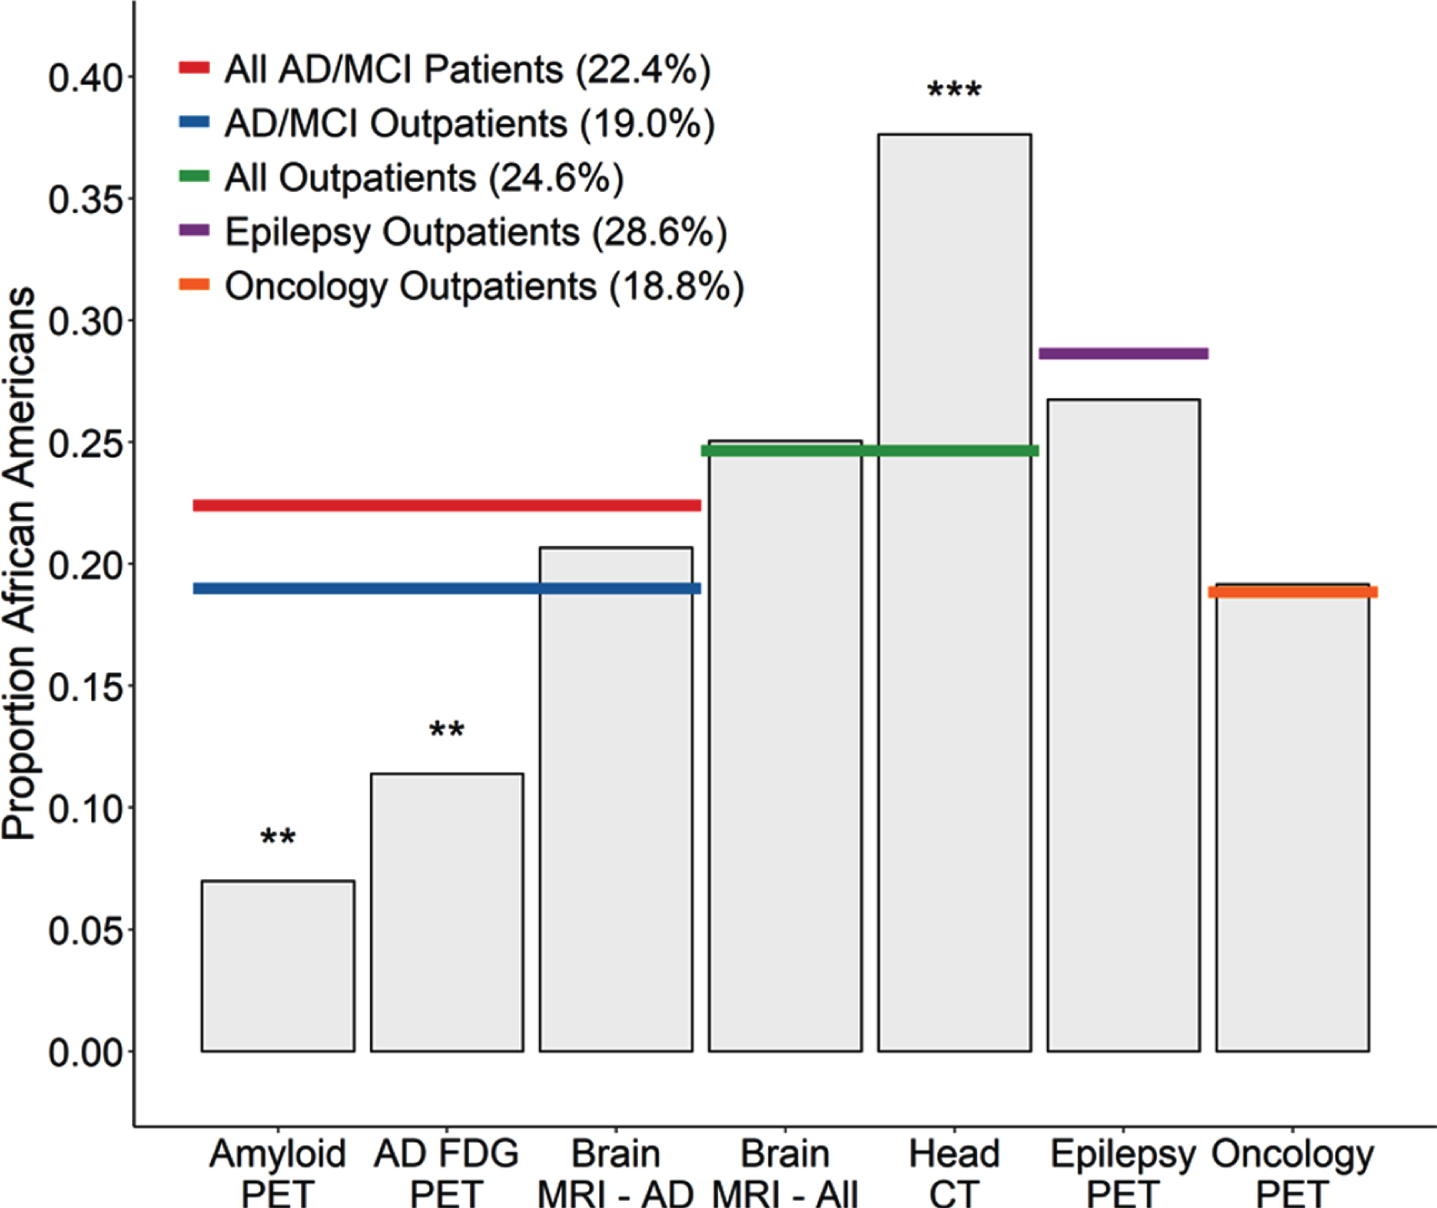 Proportion of outpatients receiving various imaging tests who were African American. The African American proportions of patients receiving Amyloid-PET (p = 0.0074) or FDG-PET for AD/MCI (p = 0.0024) was lower than the proportions of African American AD/MCI patients (red line) and trended lower compared to the African American proportion of AD/MCI outpatients across the medical system (blue line) (Amyloid-PET p = 0.027; FDG-PET p = 0.032). In contrast, the African American proportion of AD/MCI outpatients receiving brain MRI for AD/MCI did not differ from these benchmarks (p = 0.43). In addition, when compared to the total African American proportion of outpatients seen across the enterprise, there was no difference in the African American proportion of outpatients receiving brain MRIs for any indication (p = 0.15) while there was a greater than expected proportion receiving head CTs (p < 0.0001). Considering other PET imaging modalities, there were no differences in the African American proportion of outpatients receiving brain PET for epilepsy indications (p = 0.66), nor in the African American proportion of outpatients receiving oncology PET (p = 0.53).